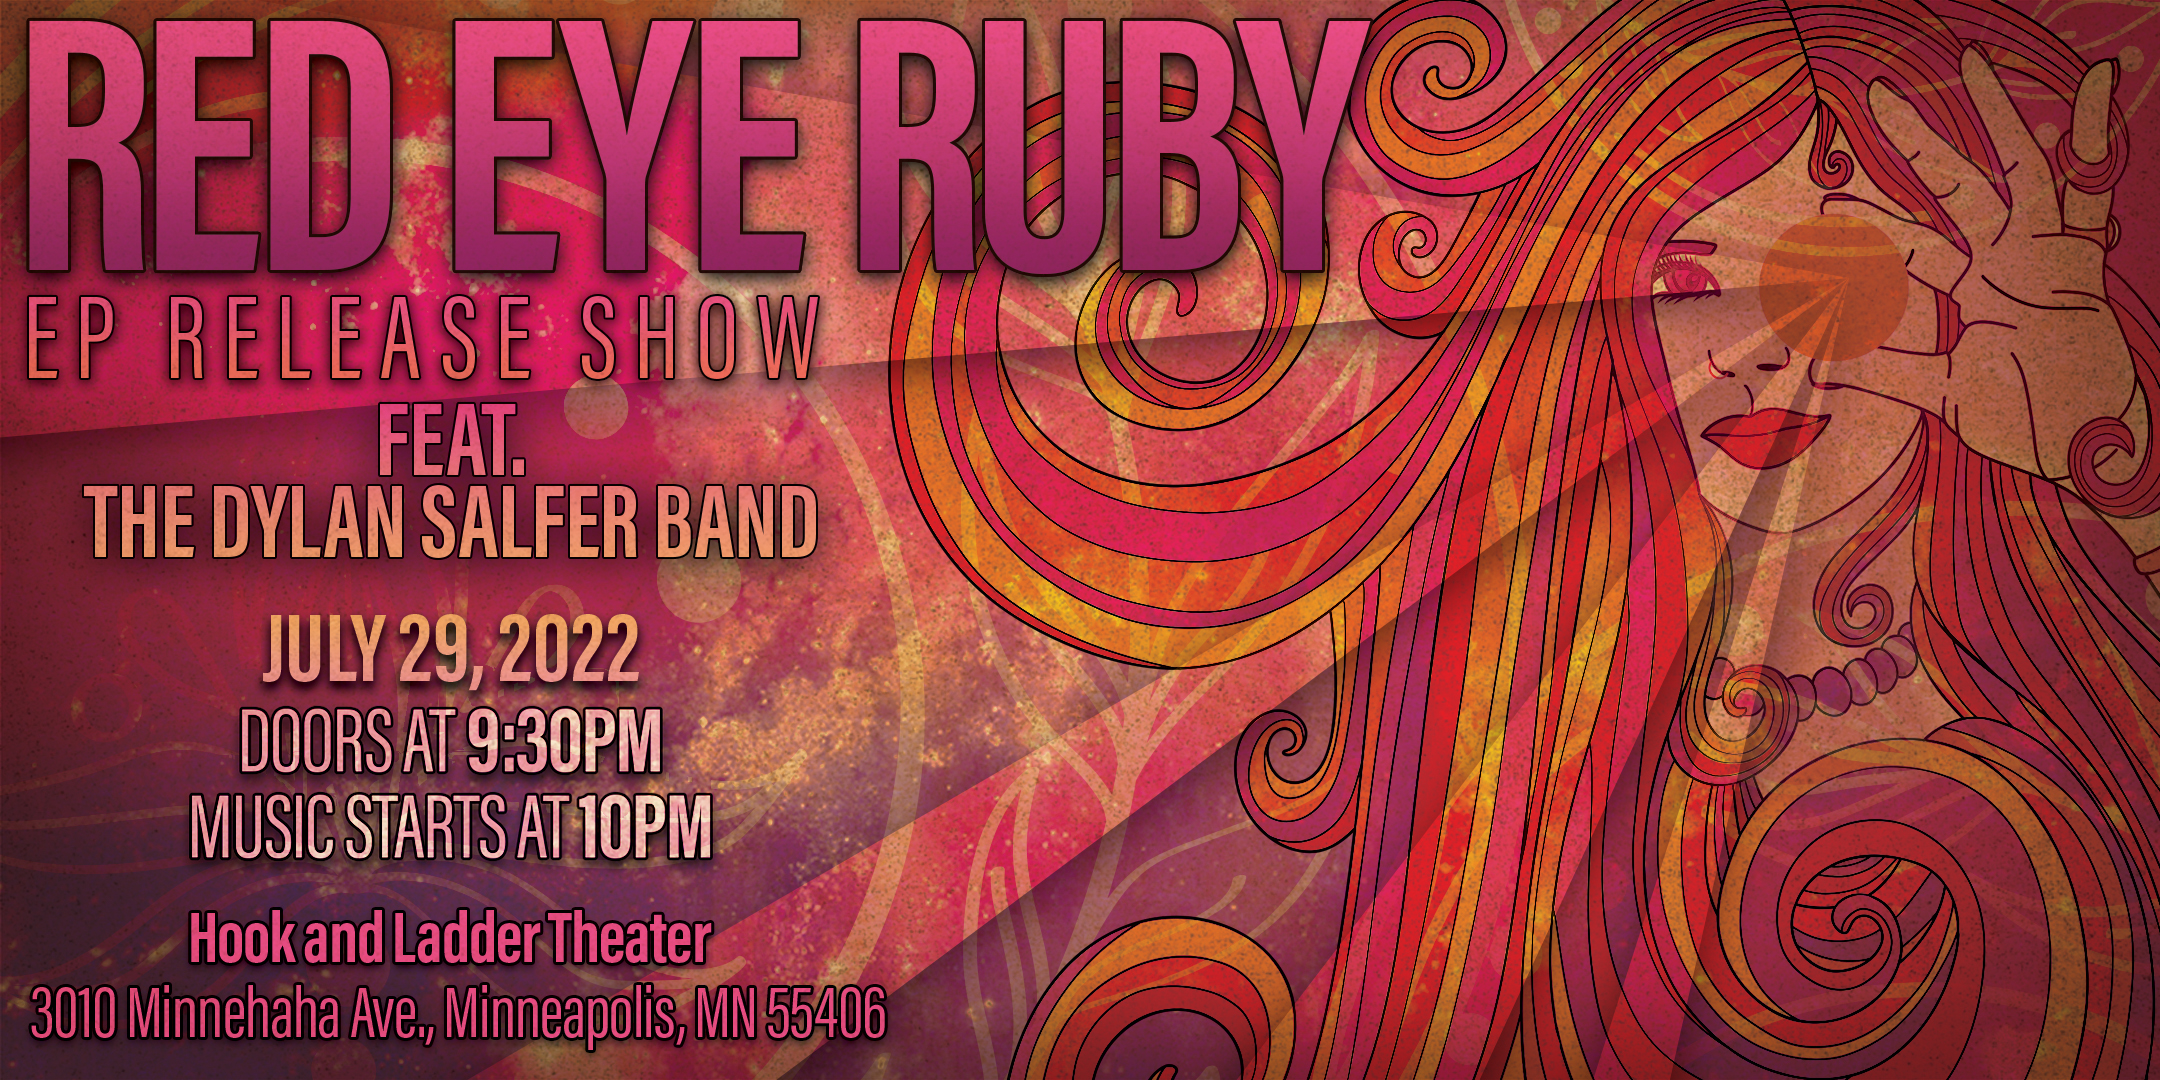 Red Eye Ruby EP Release Party with guests The Dylan Salfer Band Friday July 29 The Hook and Ladder Theater Doors 9:30pm :: Music 10:00pm :: 21+ General Admission * $7 ADV / $12 DOS * Does not include fees